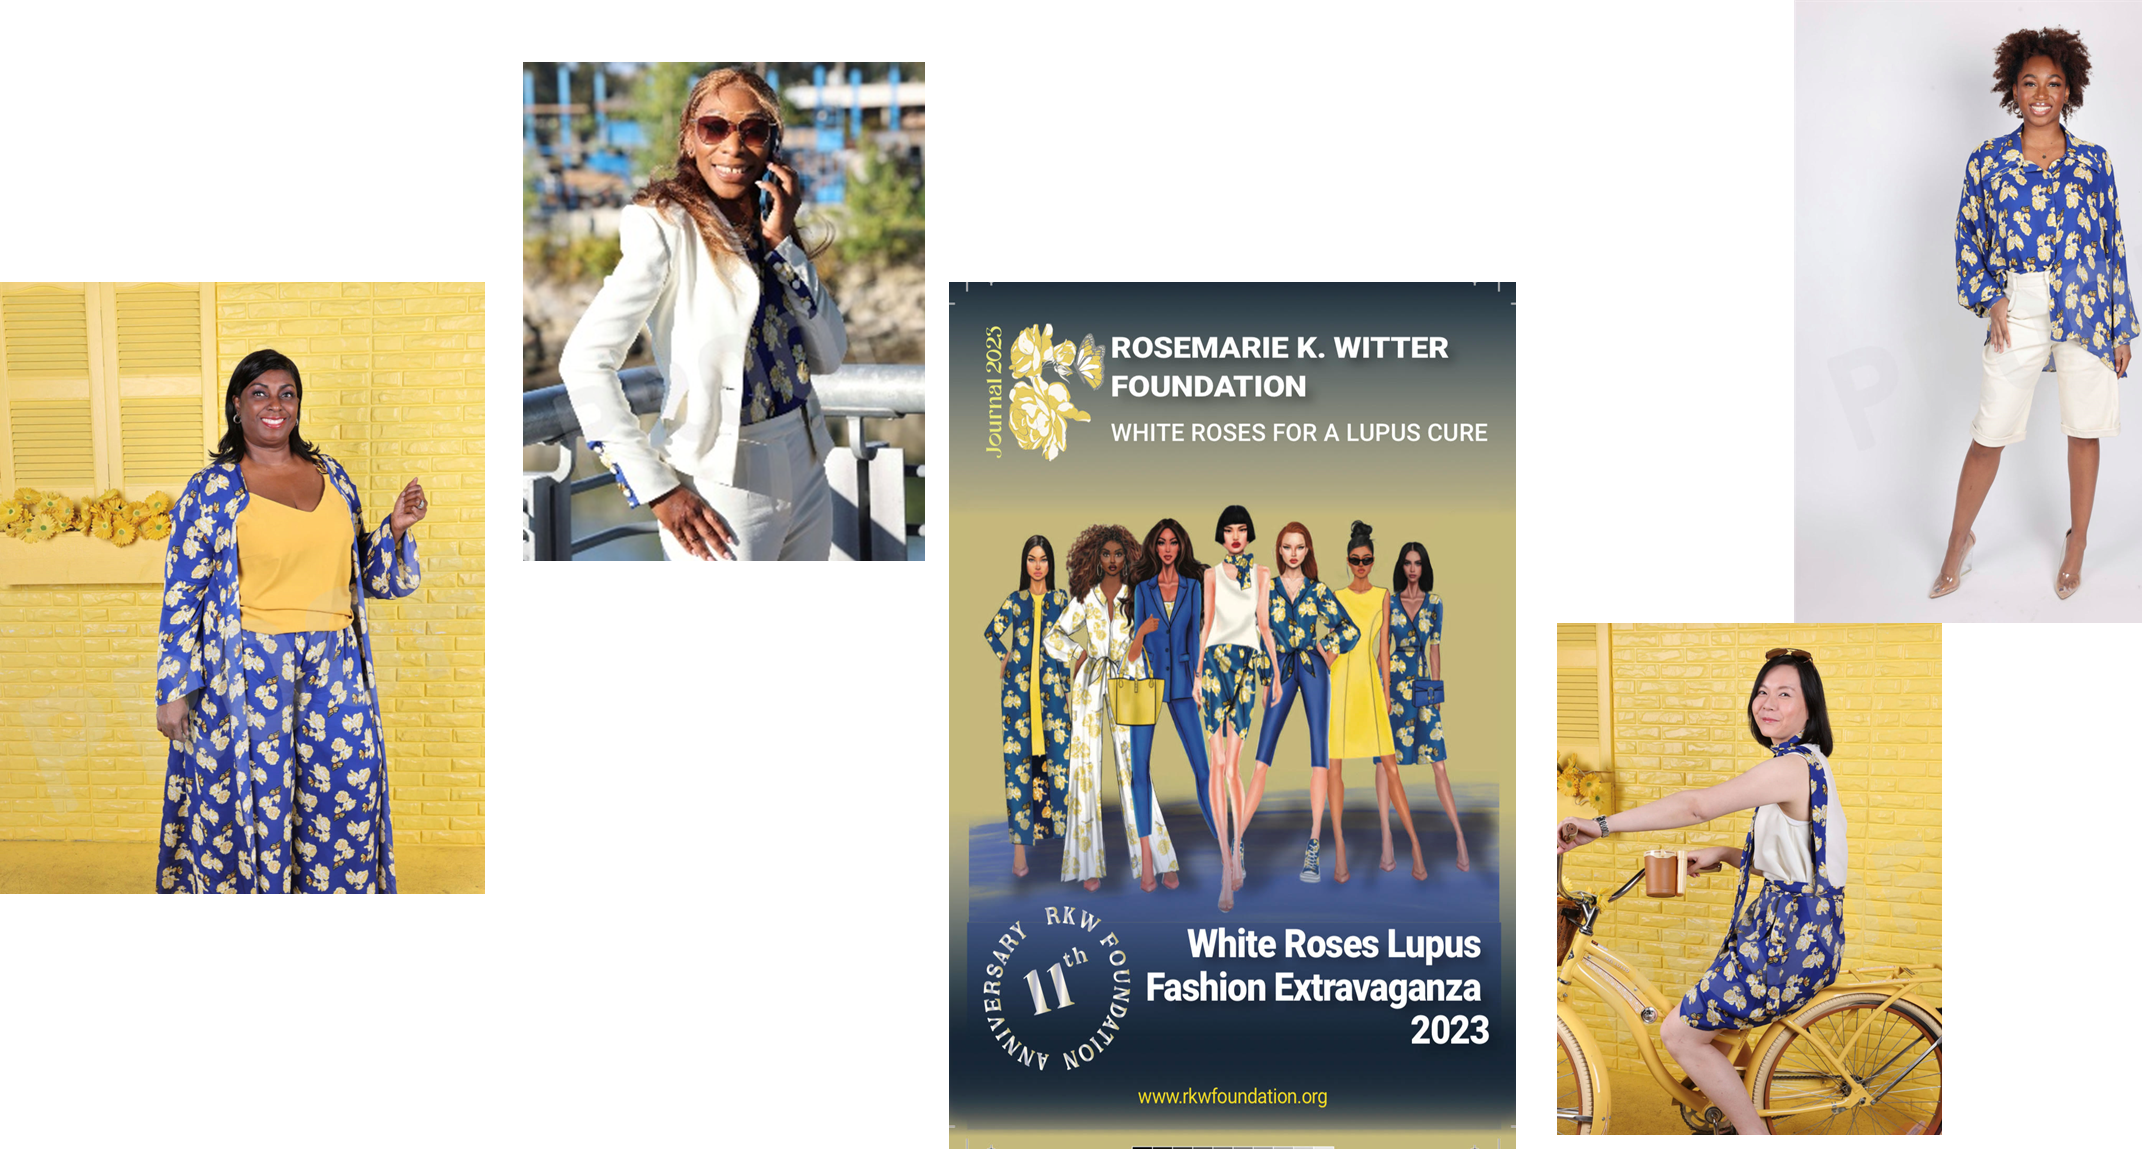 Rosemarie K. Witter (RKW) Foundation, Inc. Commemorates 11th Anniversary with Fashion Extravaganza in Aid of Lupus